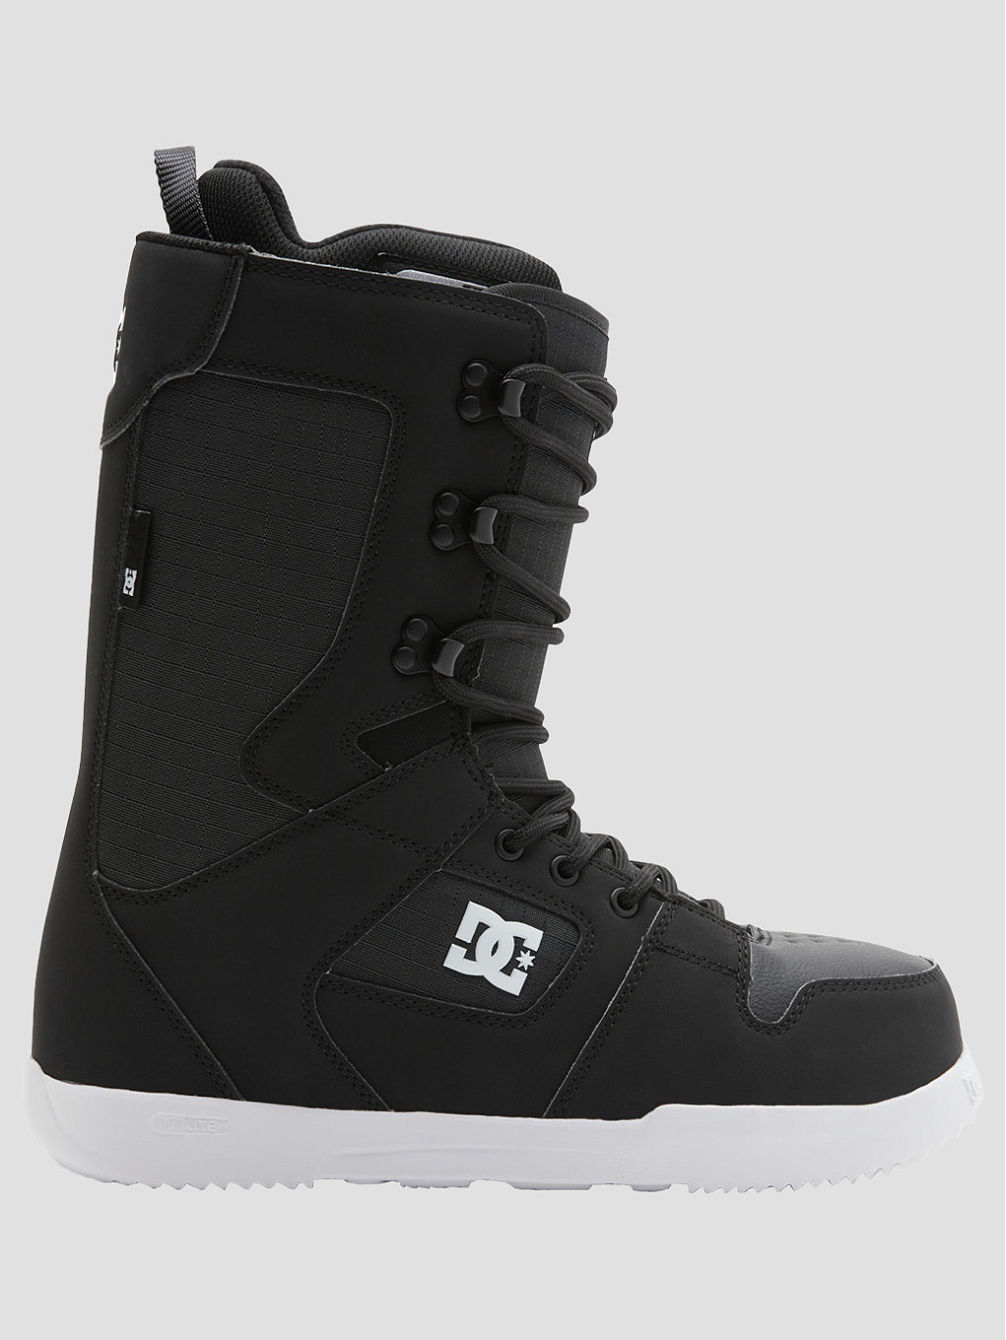 Phase Snowboard Boots